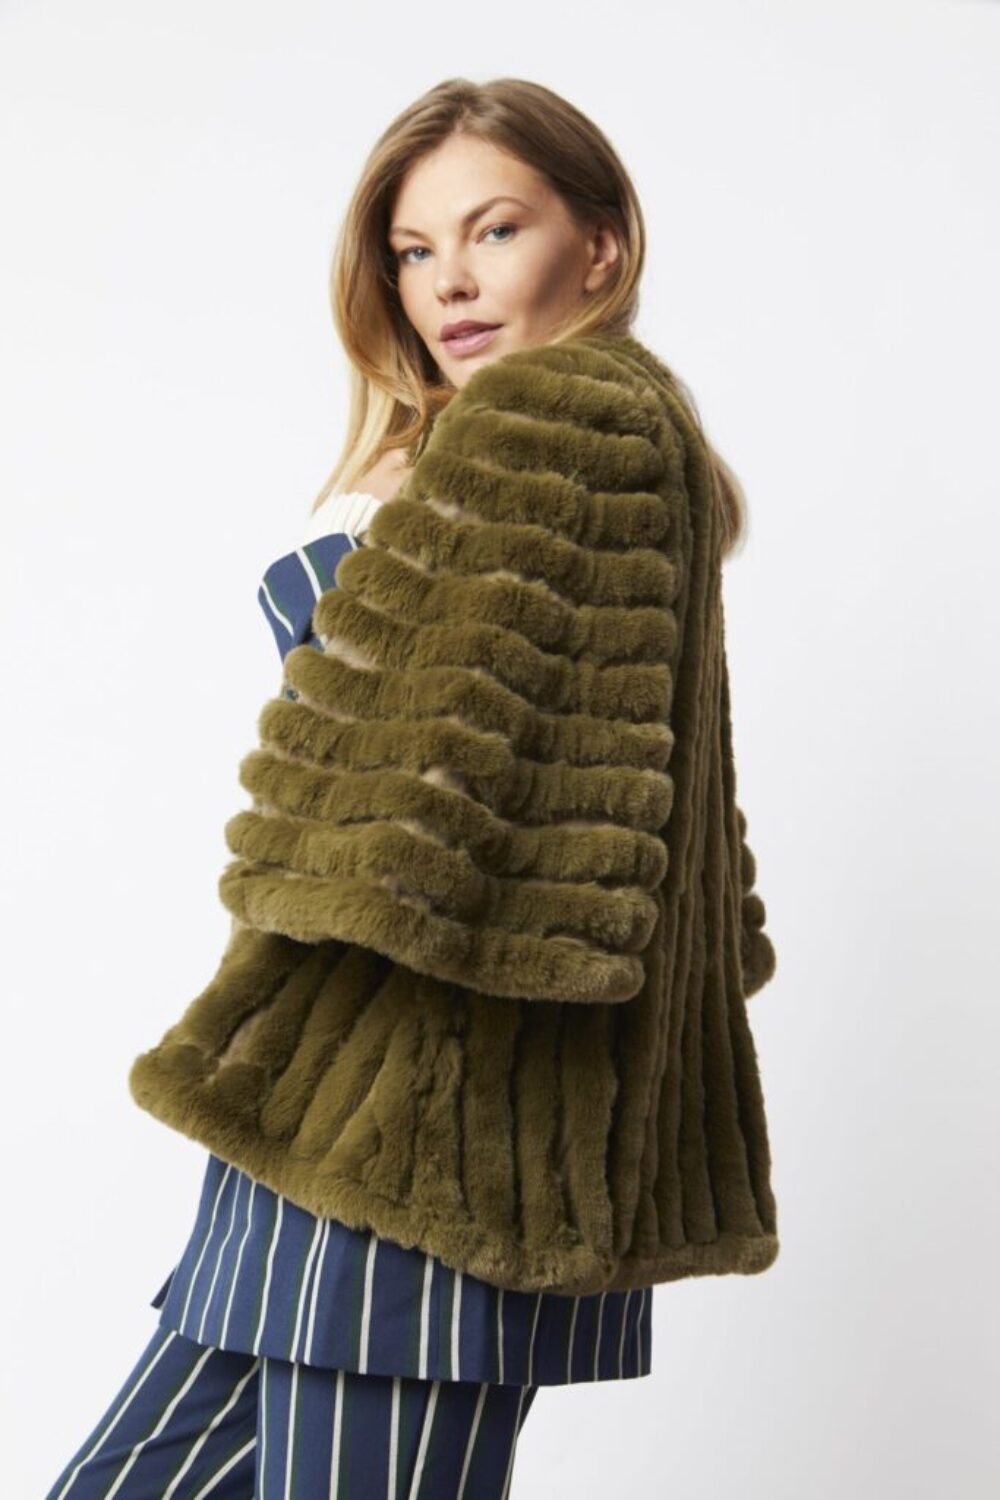 Shop Lux Khaki Faux Fur Striped Coat and women's luxury and designer clothes at www.lux-apparel.co.uk